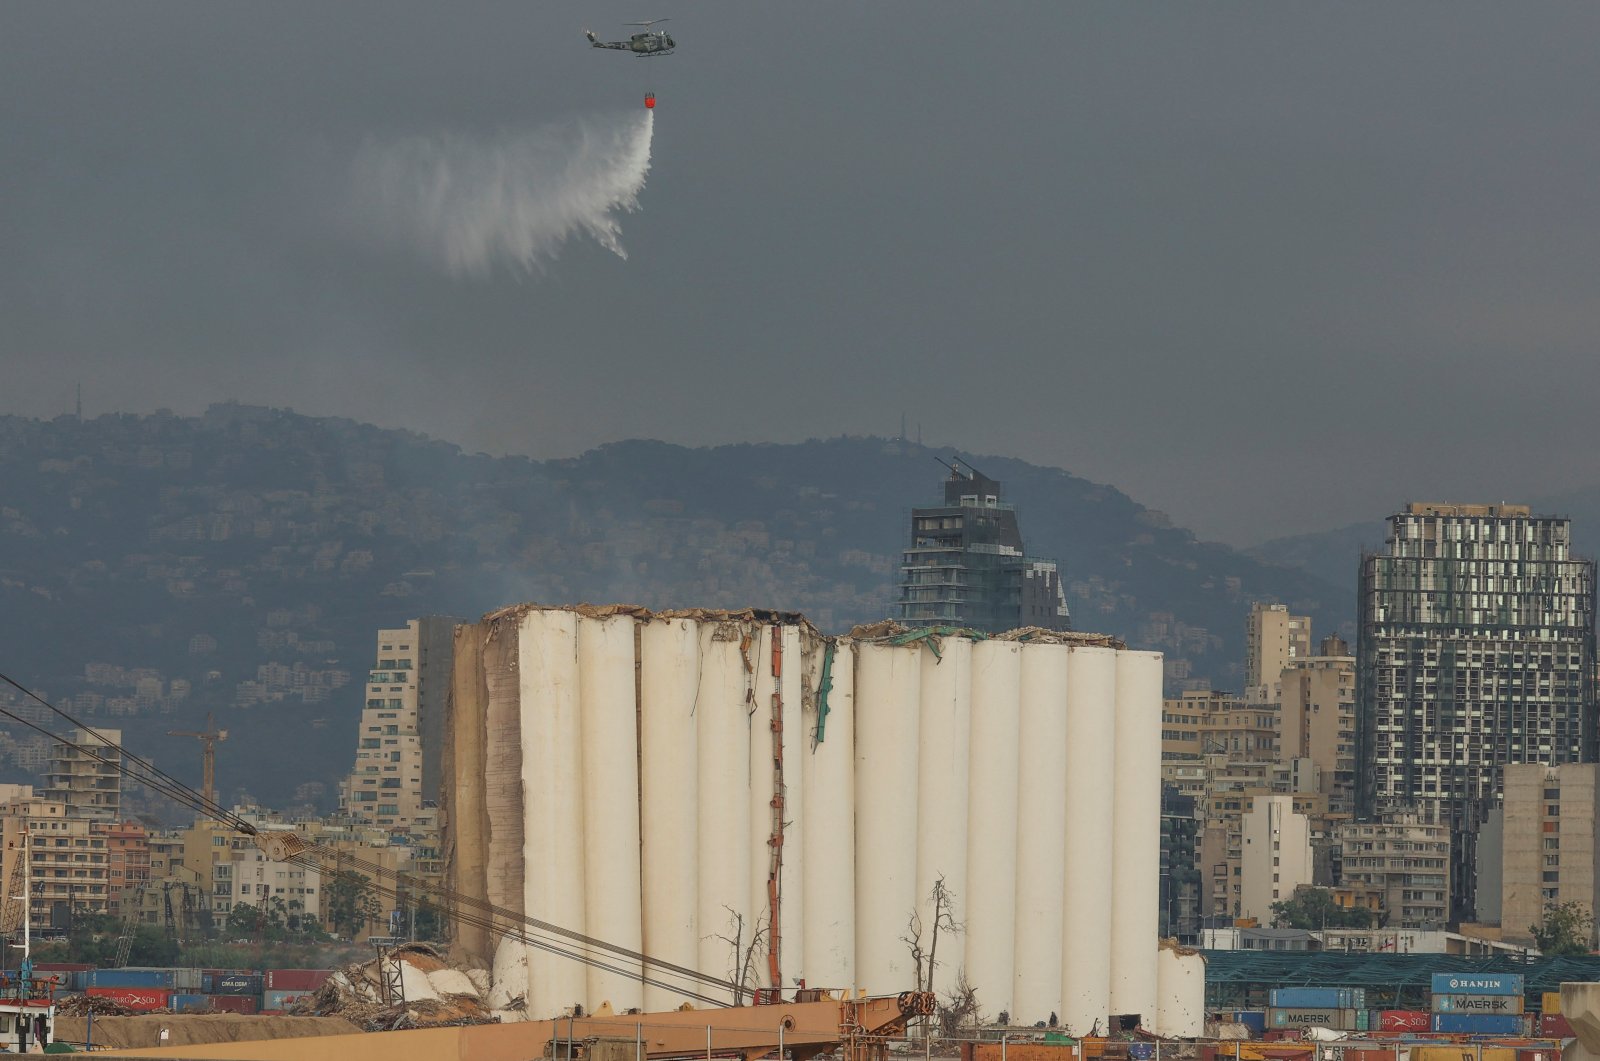 A helicopter drops water over the partially-collapsed Beirut grain silos, damaged in the August 2020 port blast, in Beirut Lebanon July 31, 2022. (Reuters Photo)